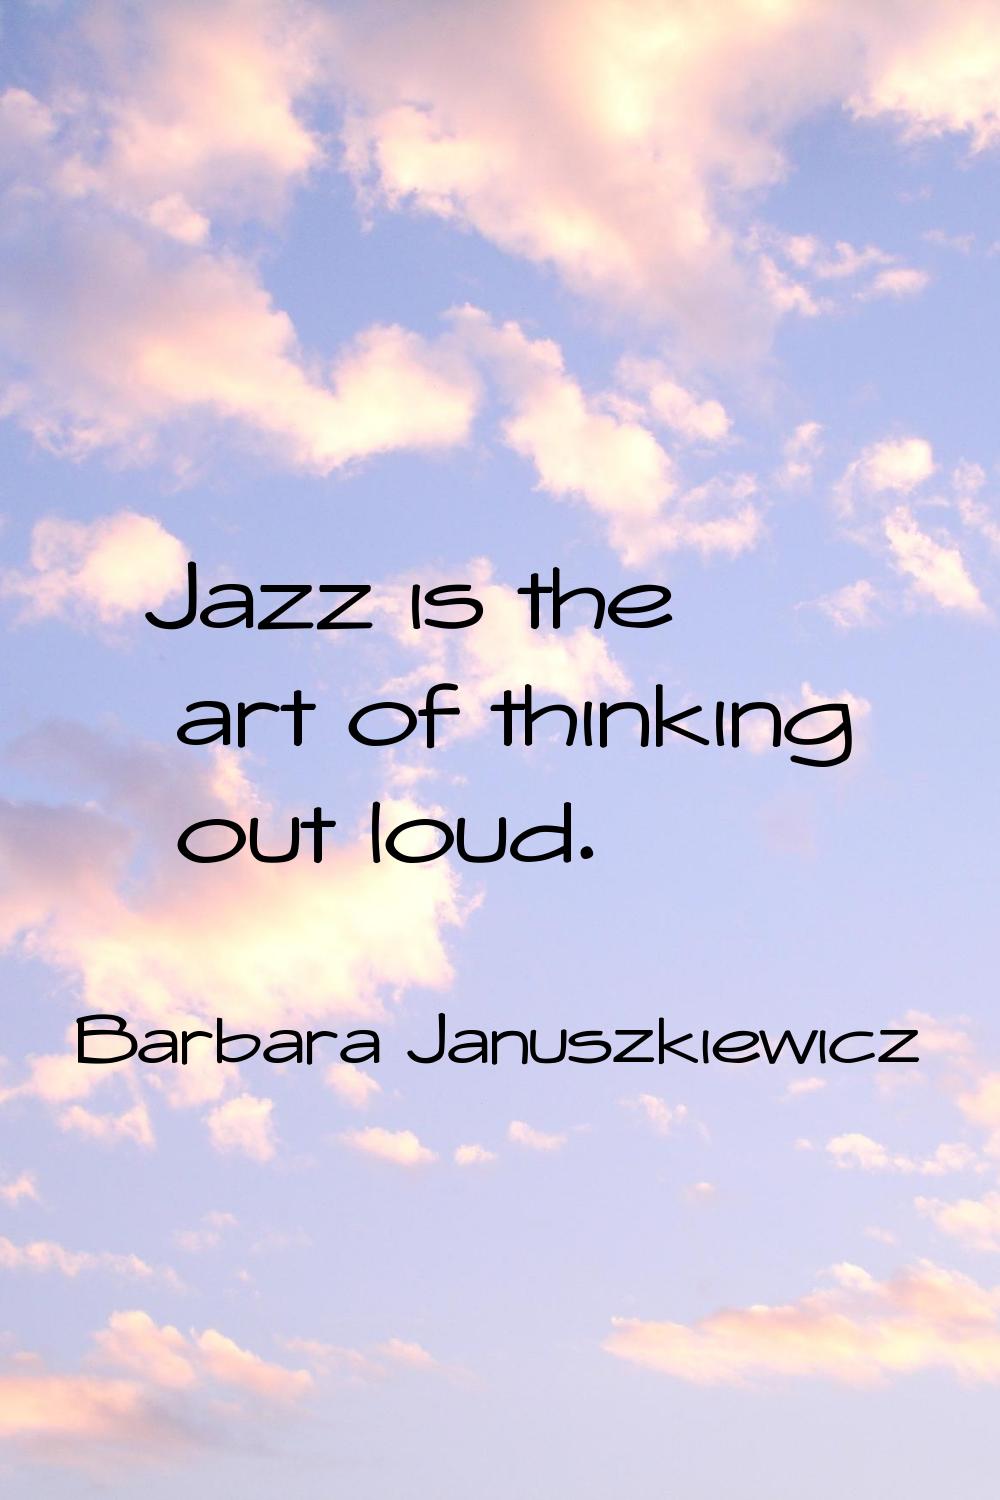 Jazz is the art of thinking out loud.